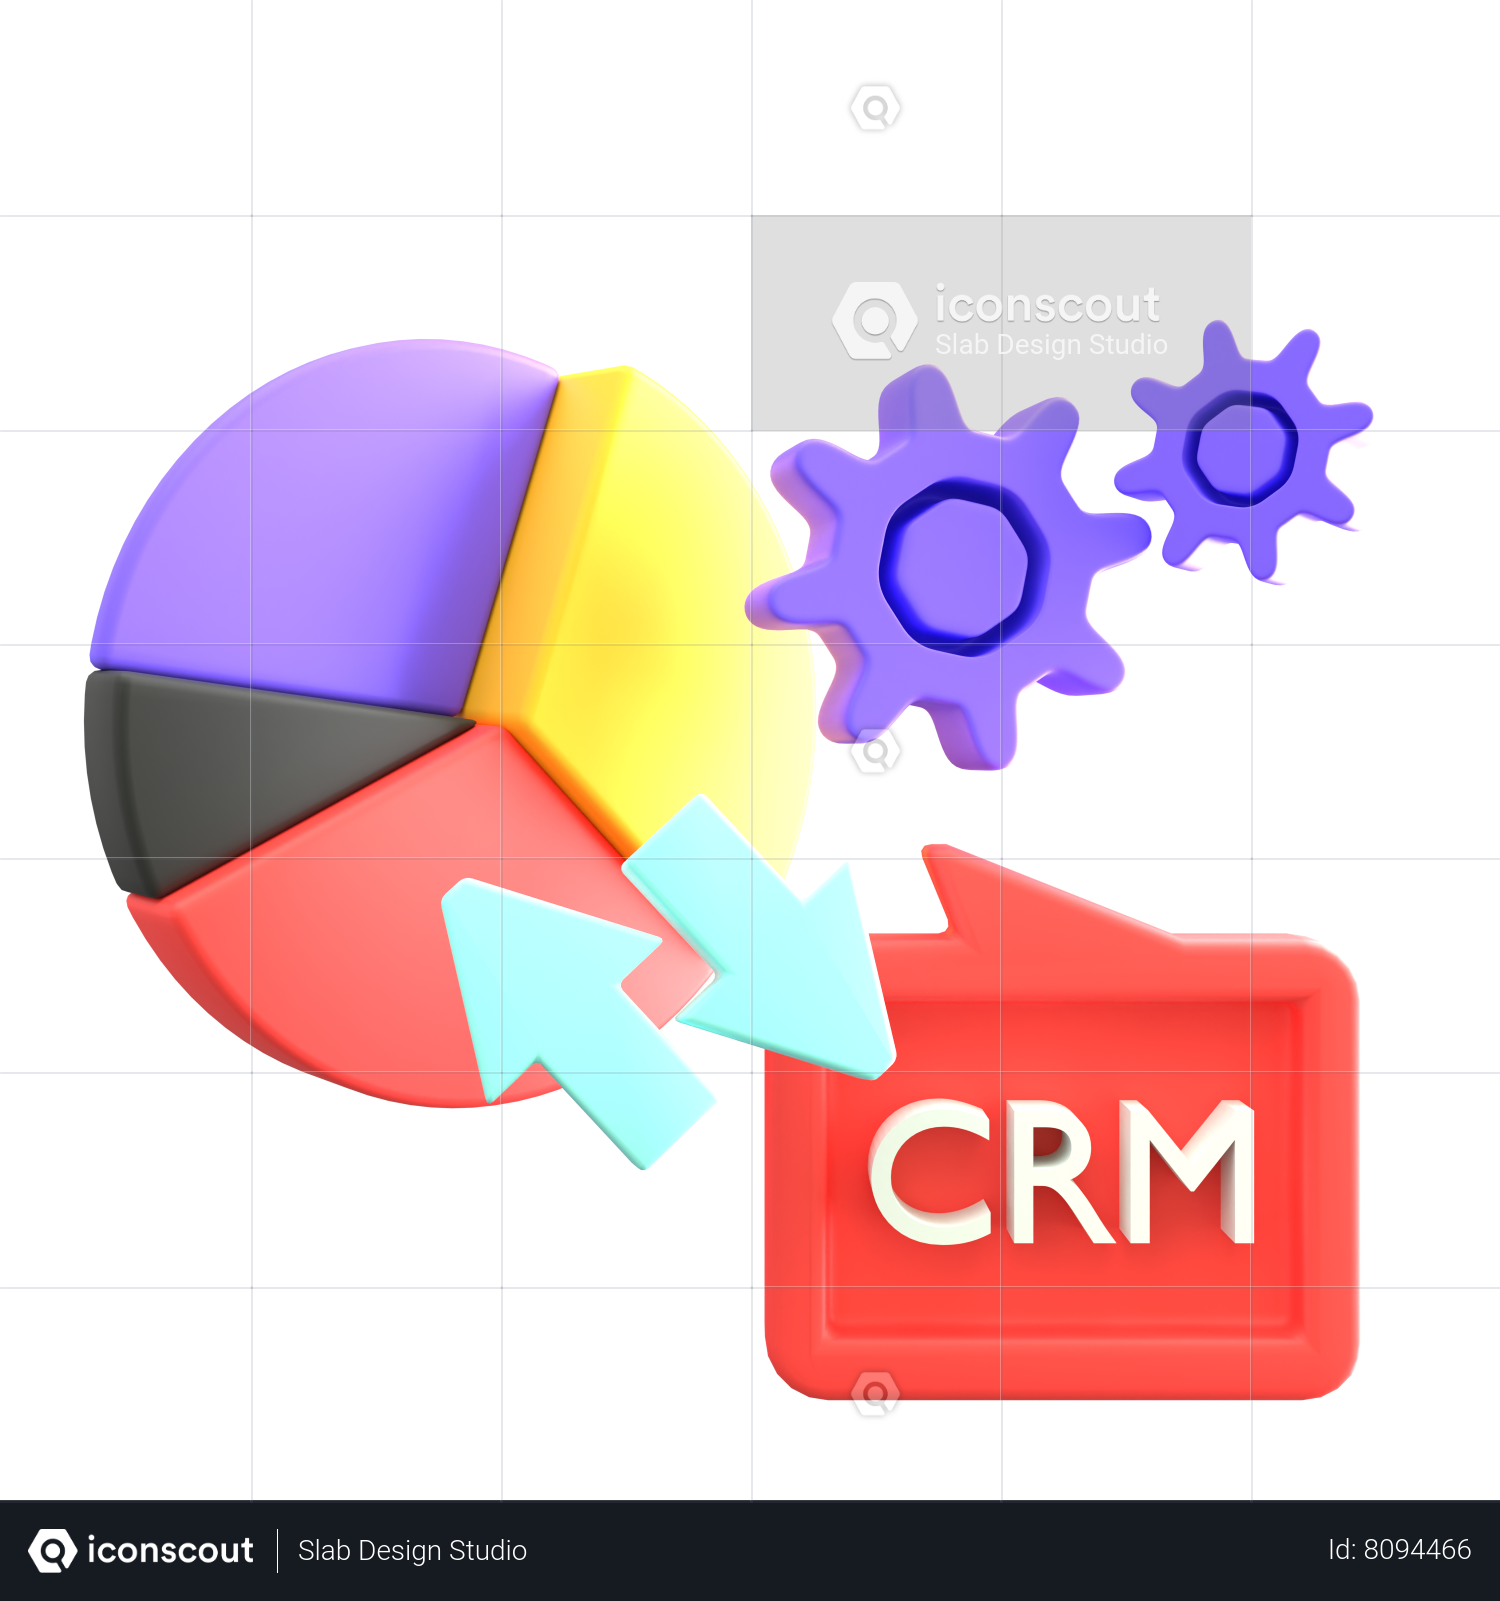 Promotional Materials | Pipeline CRM